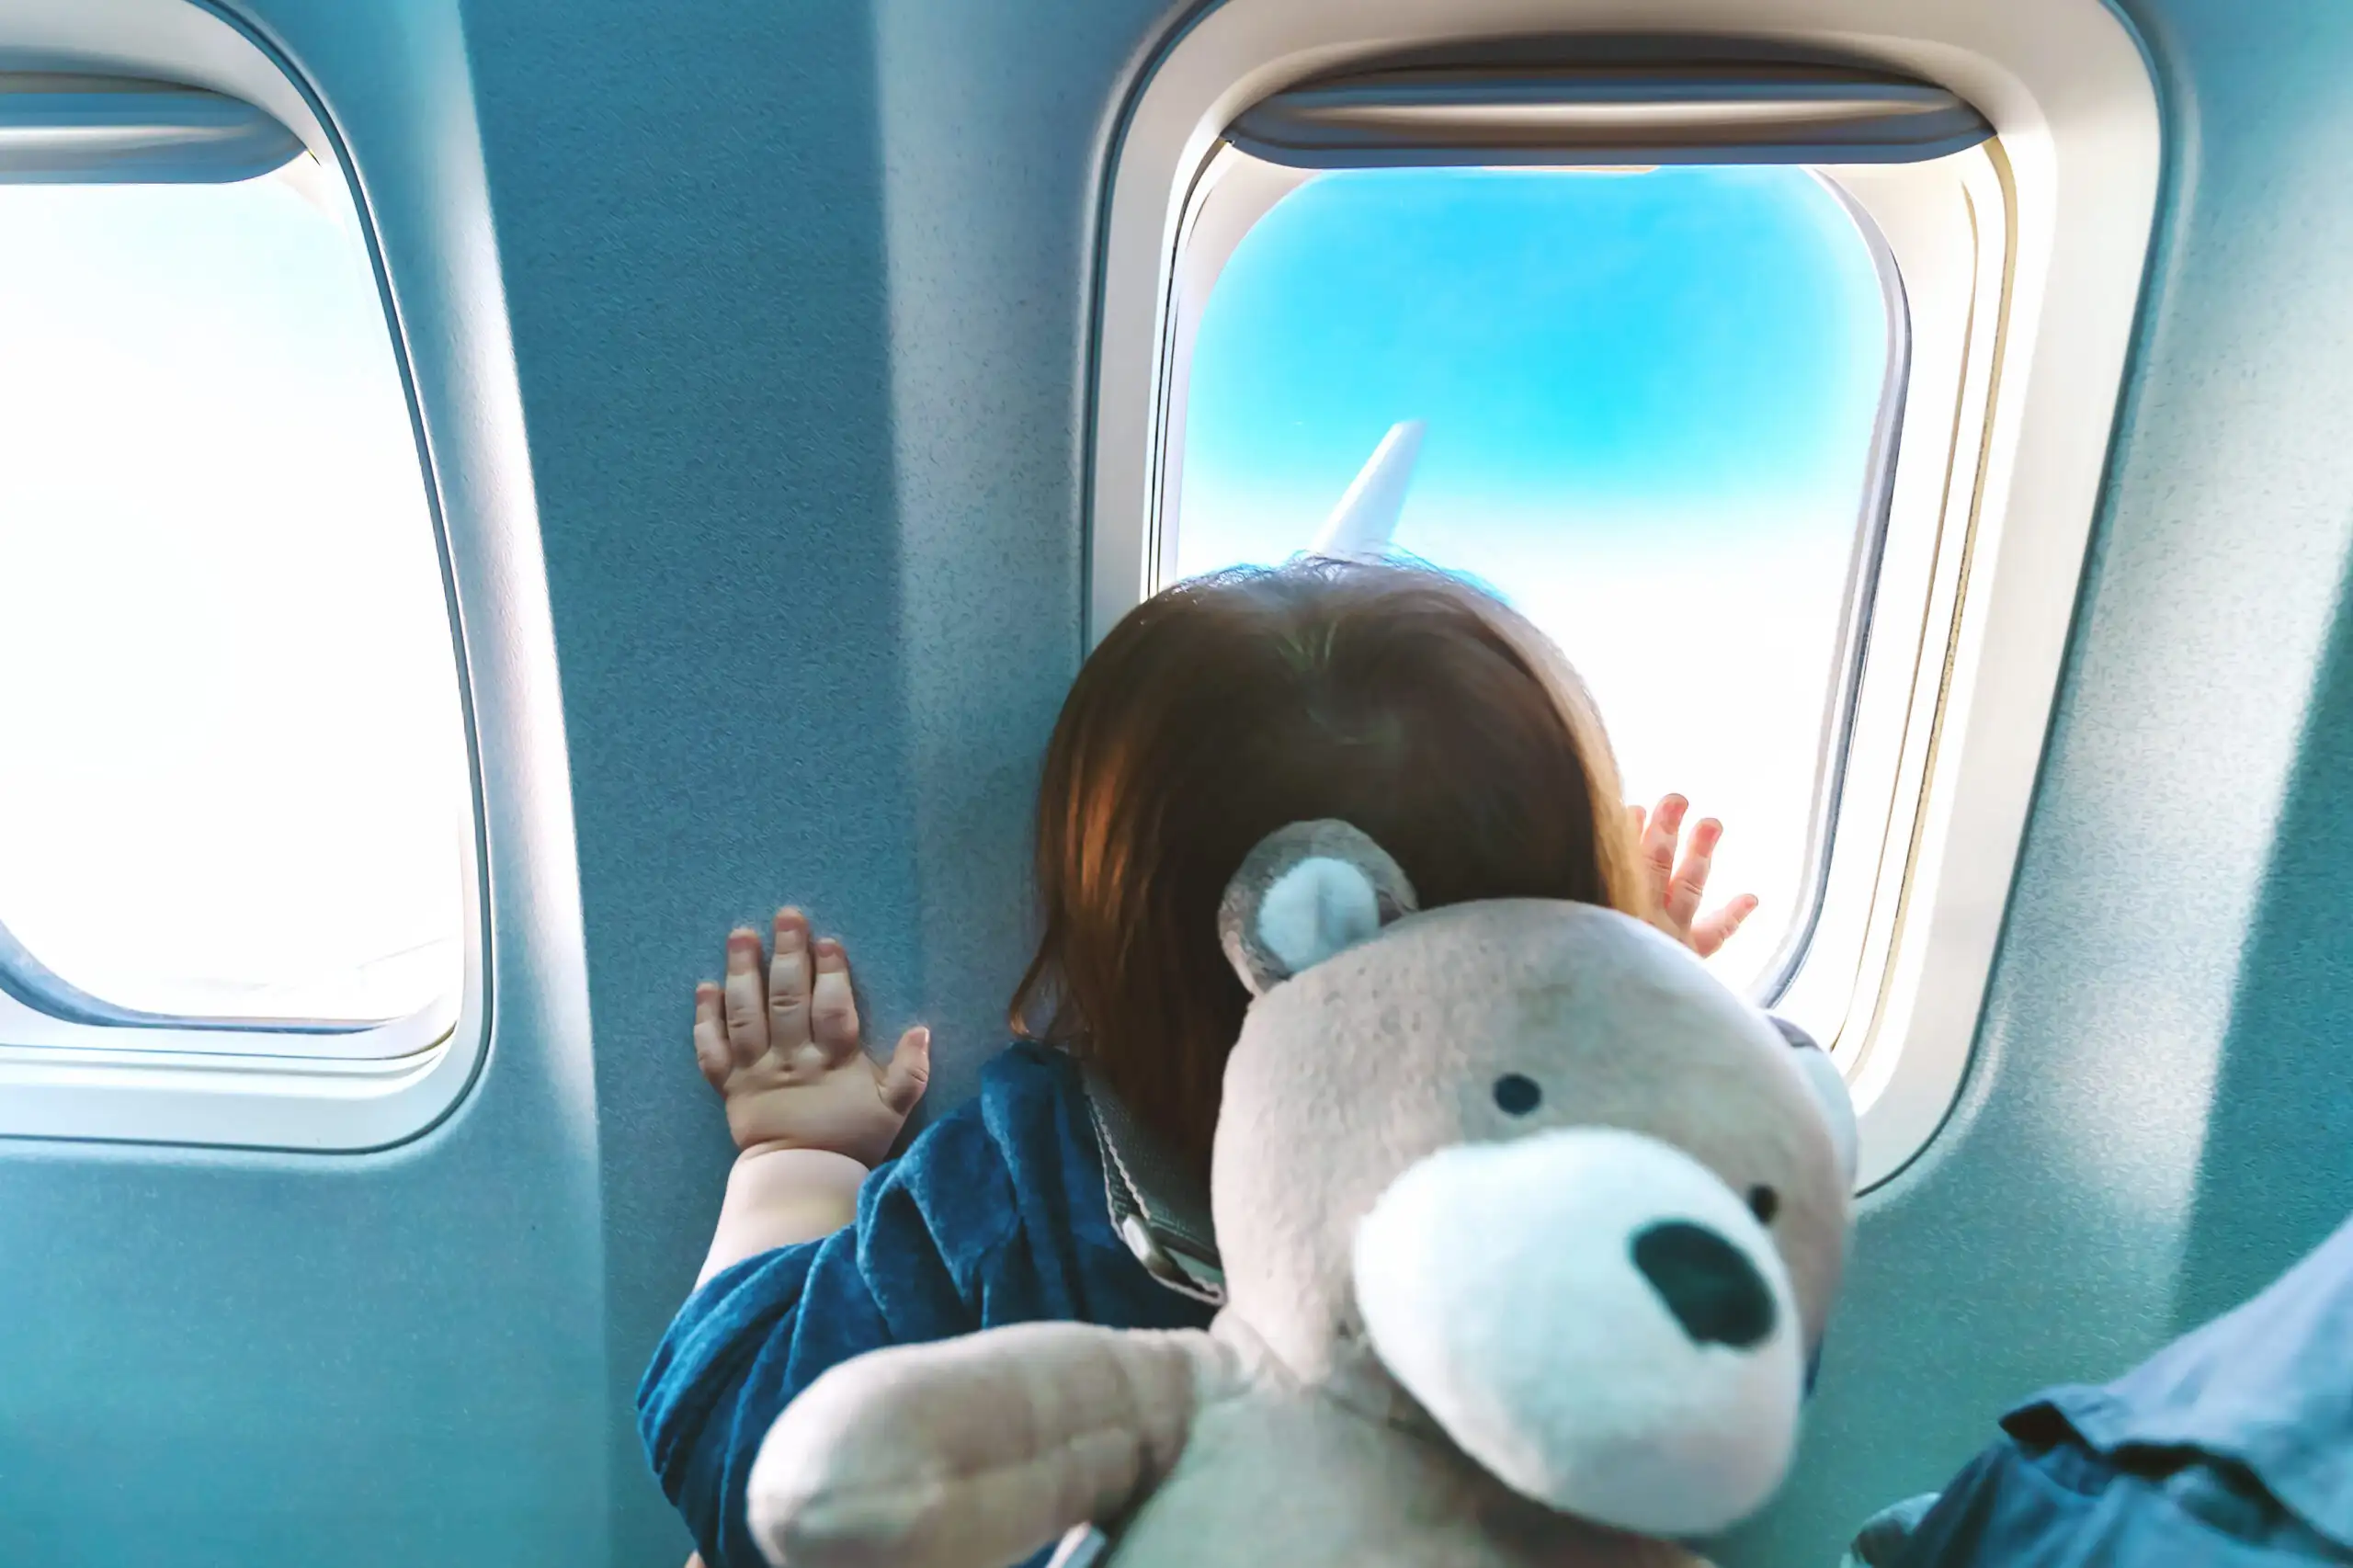 Toddler looking out airplane window with teddy bear